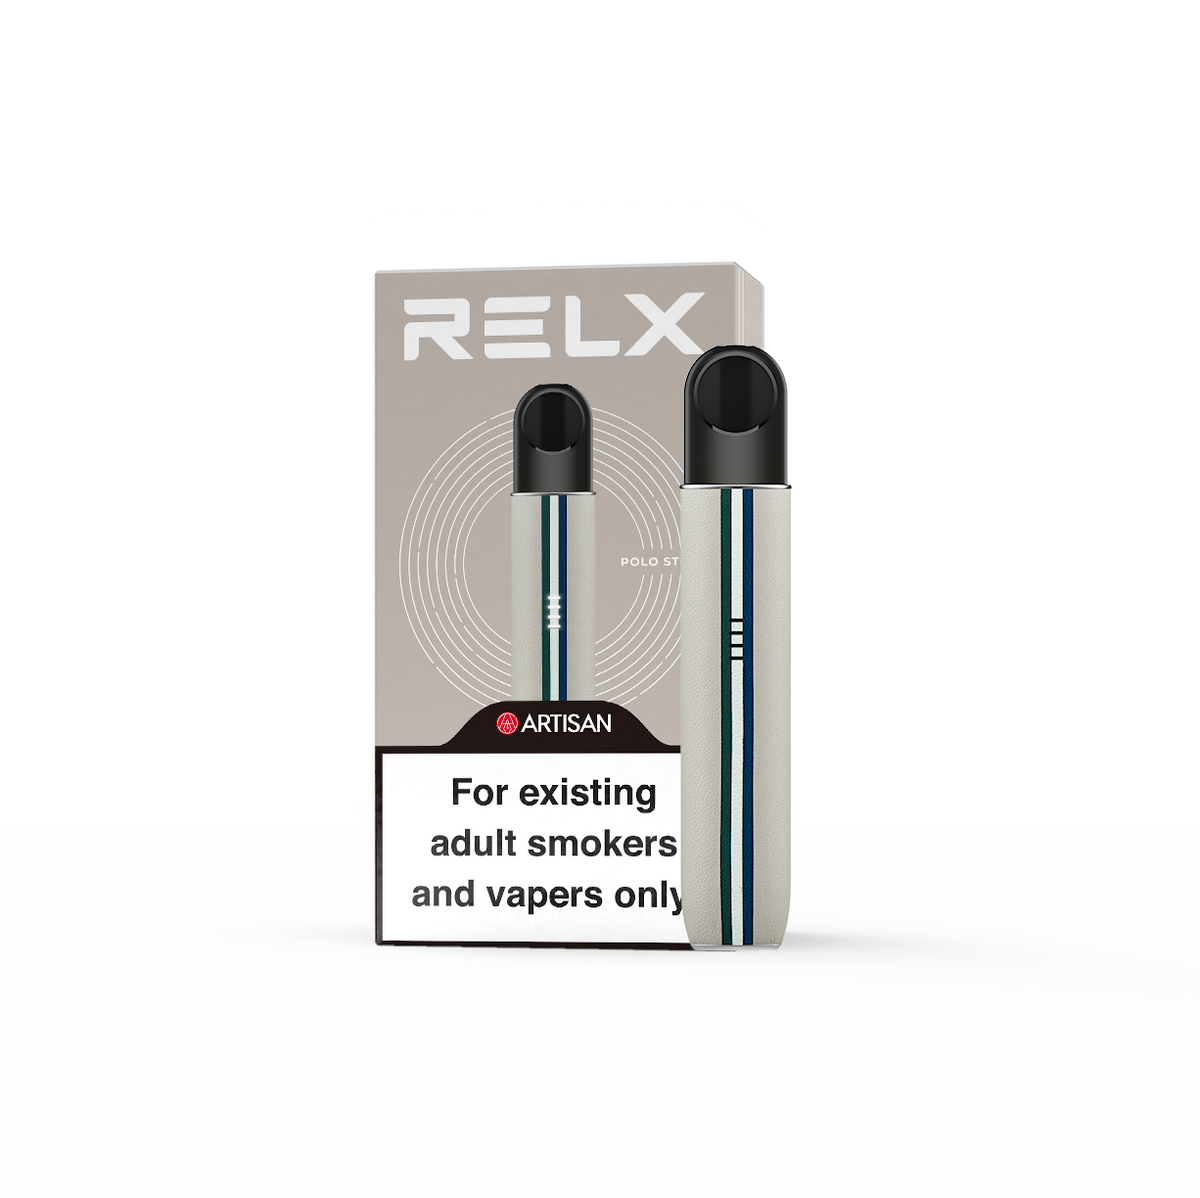 RELX Artisan Polo Stripe Device Packaging - the Premium Vaping Experience